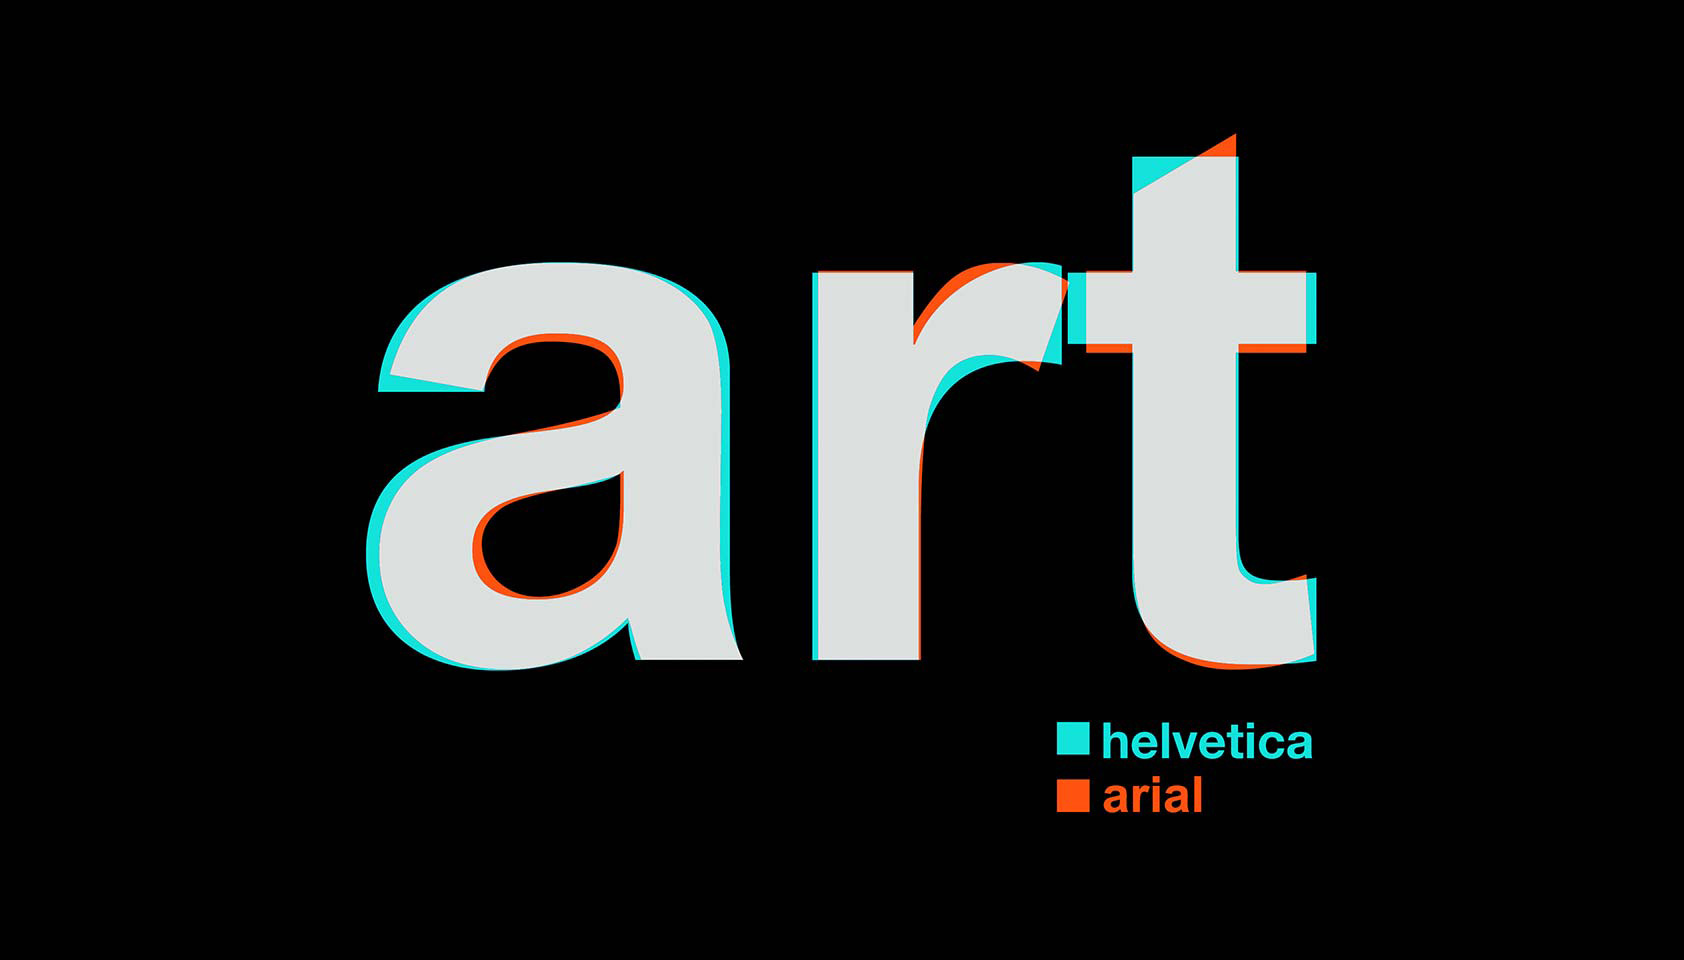 What is the difference between Arial and Helvetica?